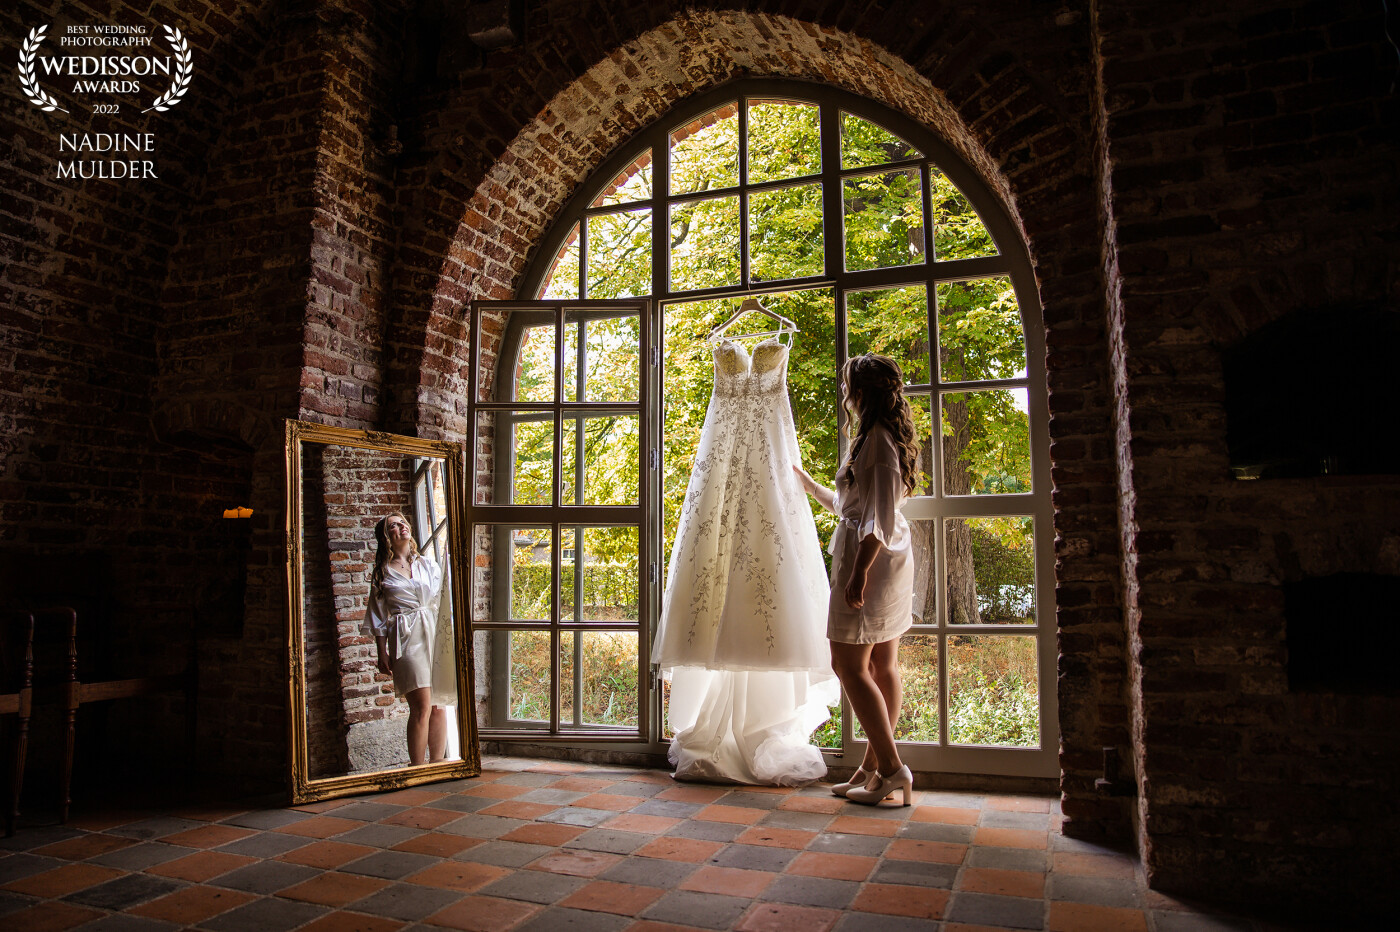 I think this is my absolute favorite wedding location in the Netherlands so far. There are some awesome locations within Kasteel Tongelaar and I couldn’t resist capturing this beautiful bride in front of this huge window.